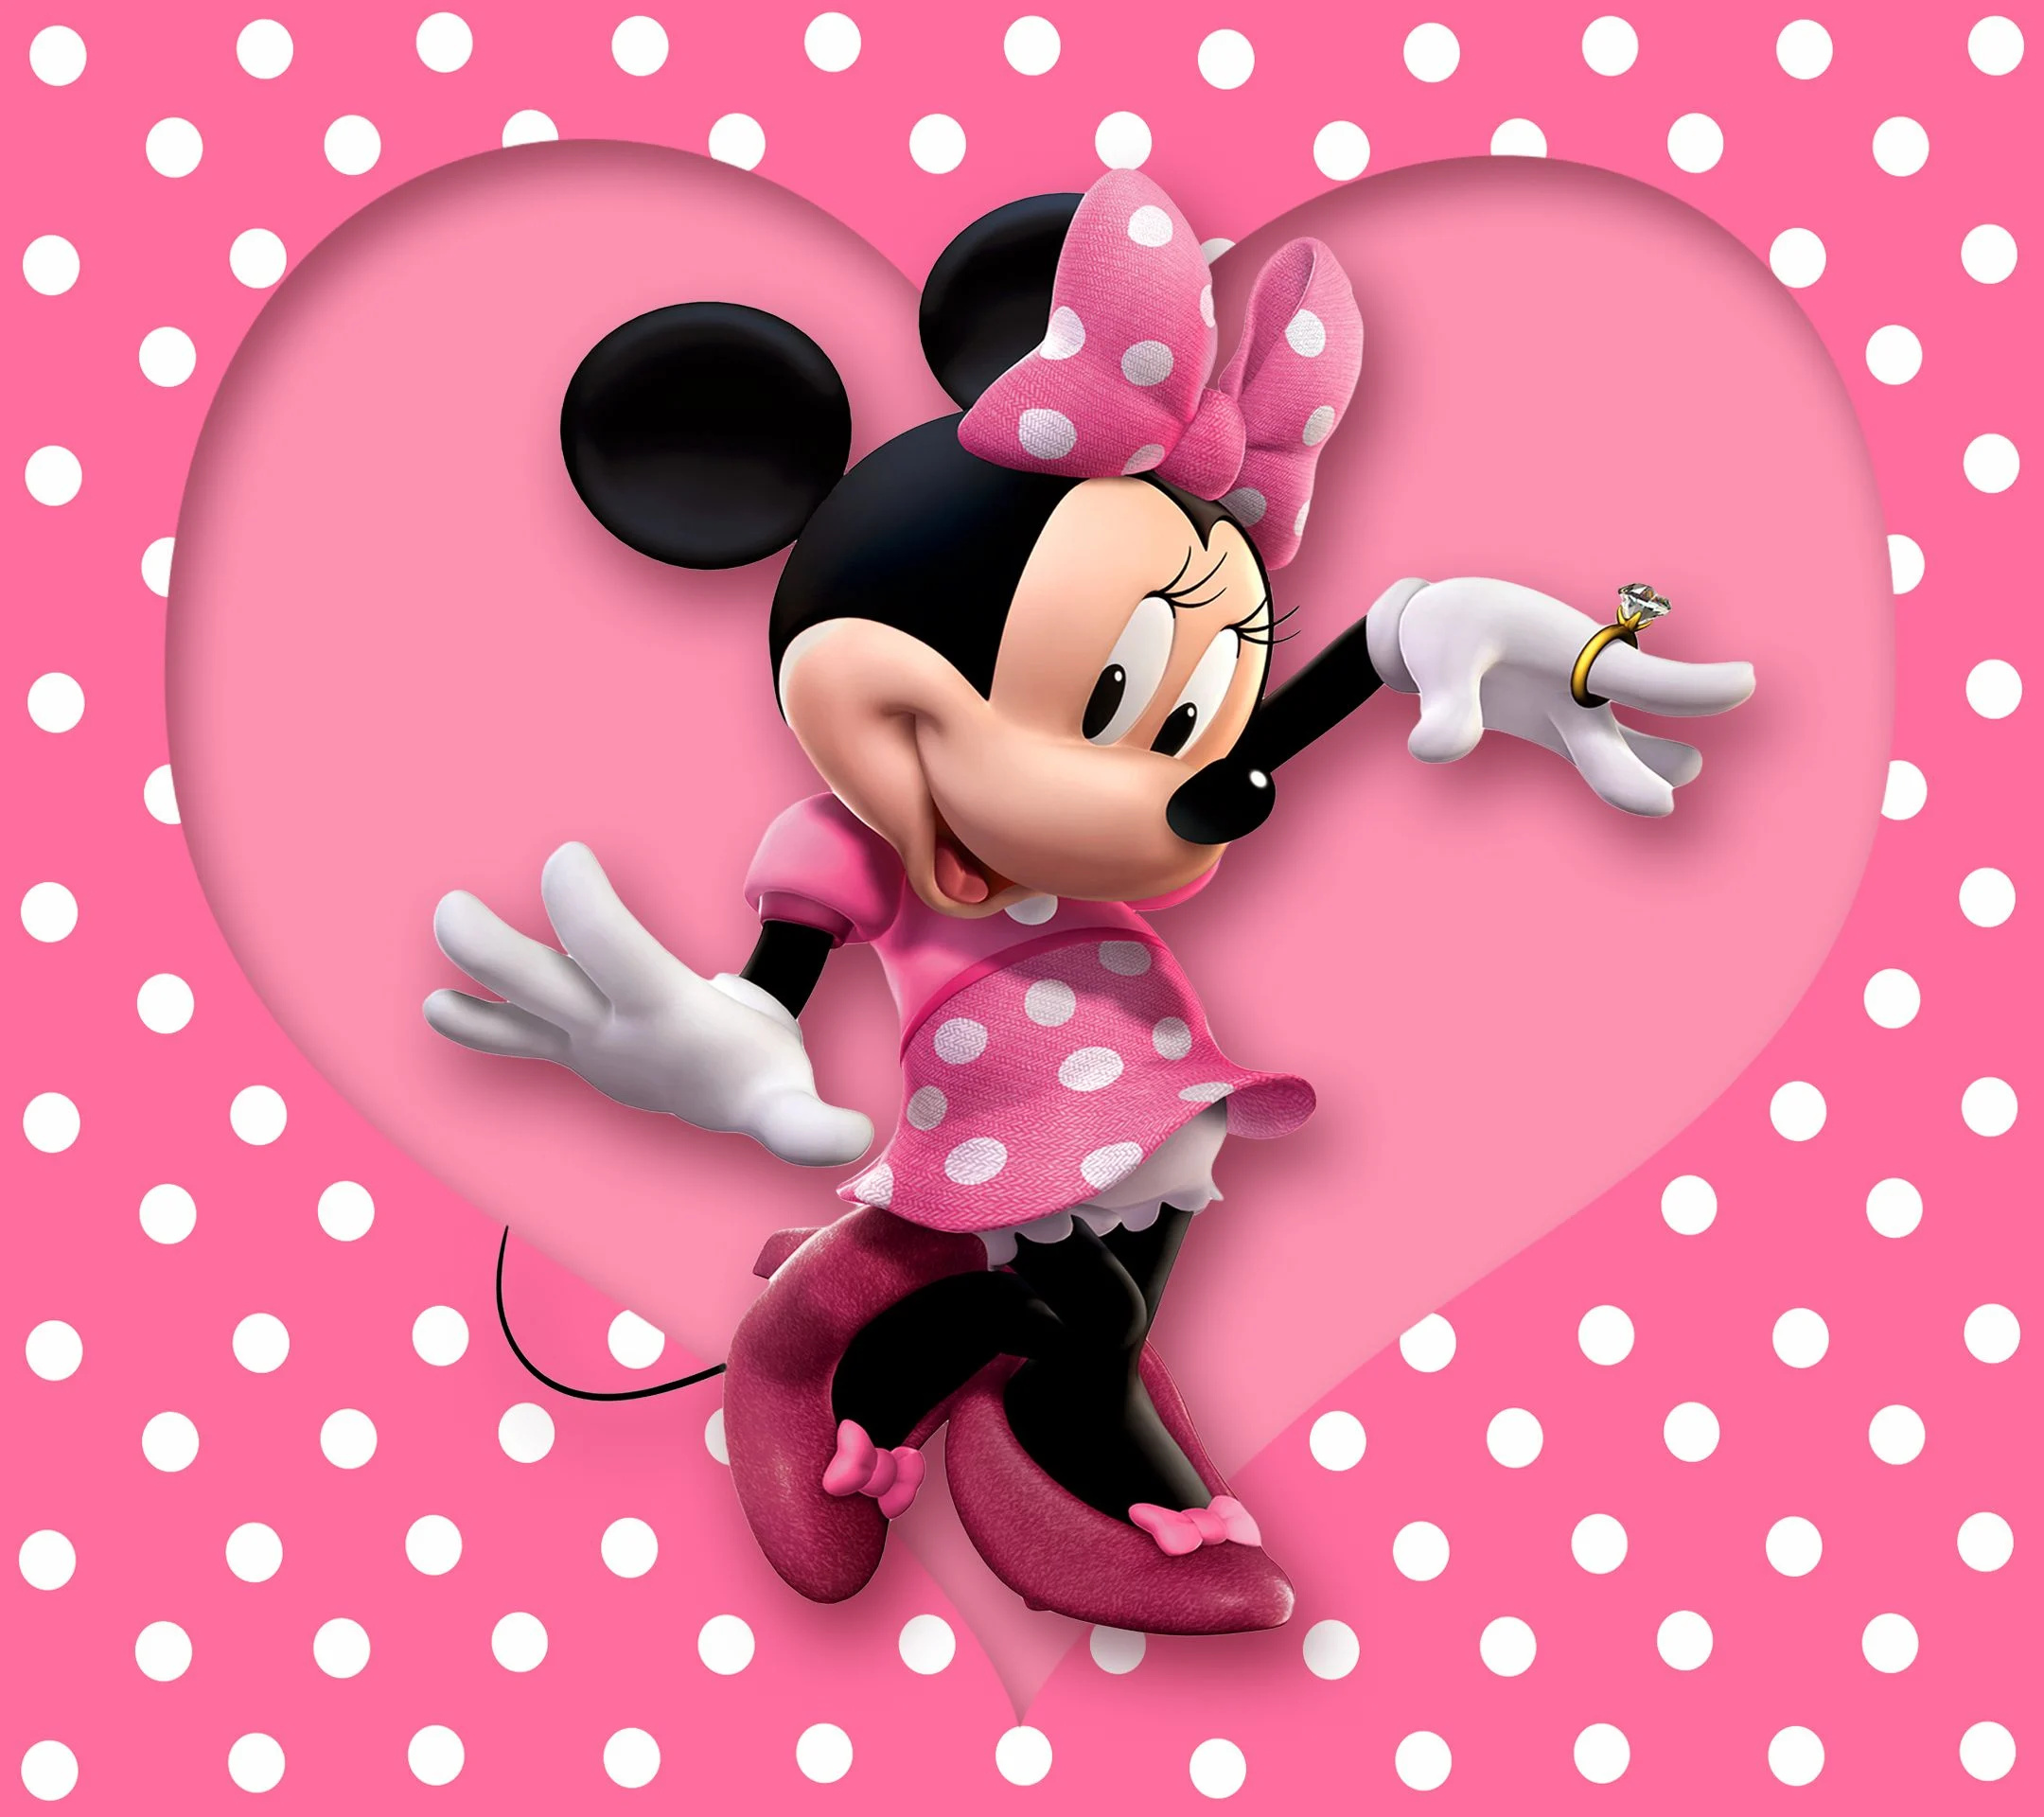 Minnie Mouse, Pink wallpapers, Iconic red dress, 2022 update, 2160x1920 HD Desktop